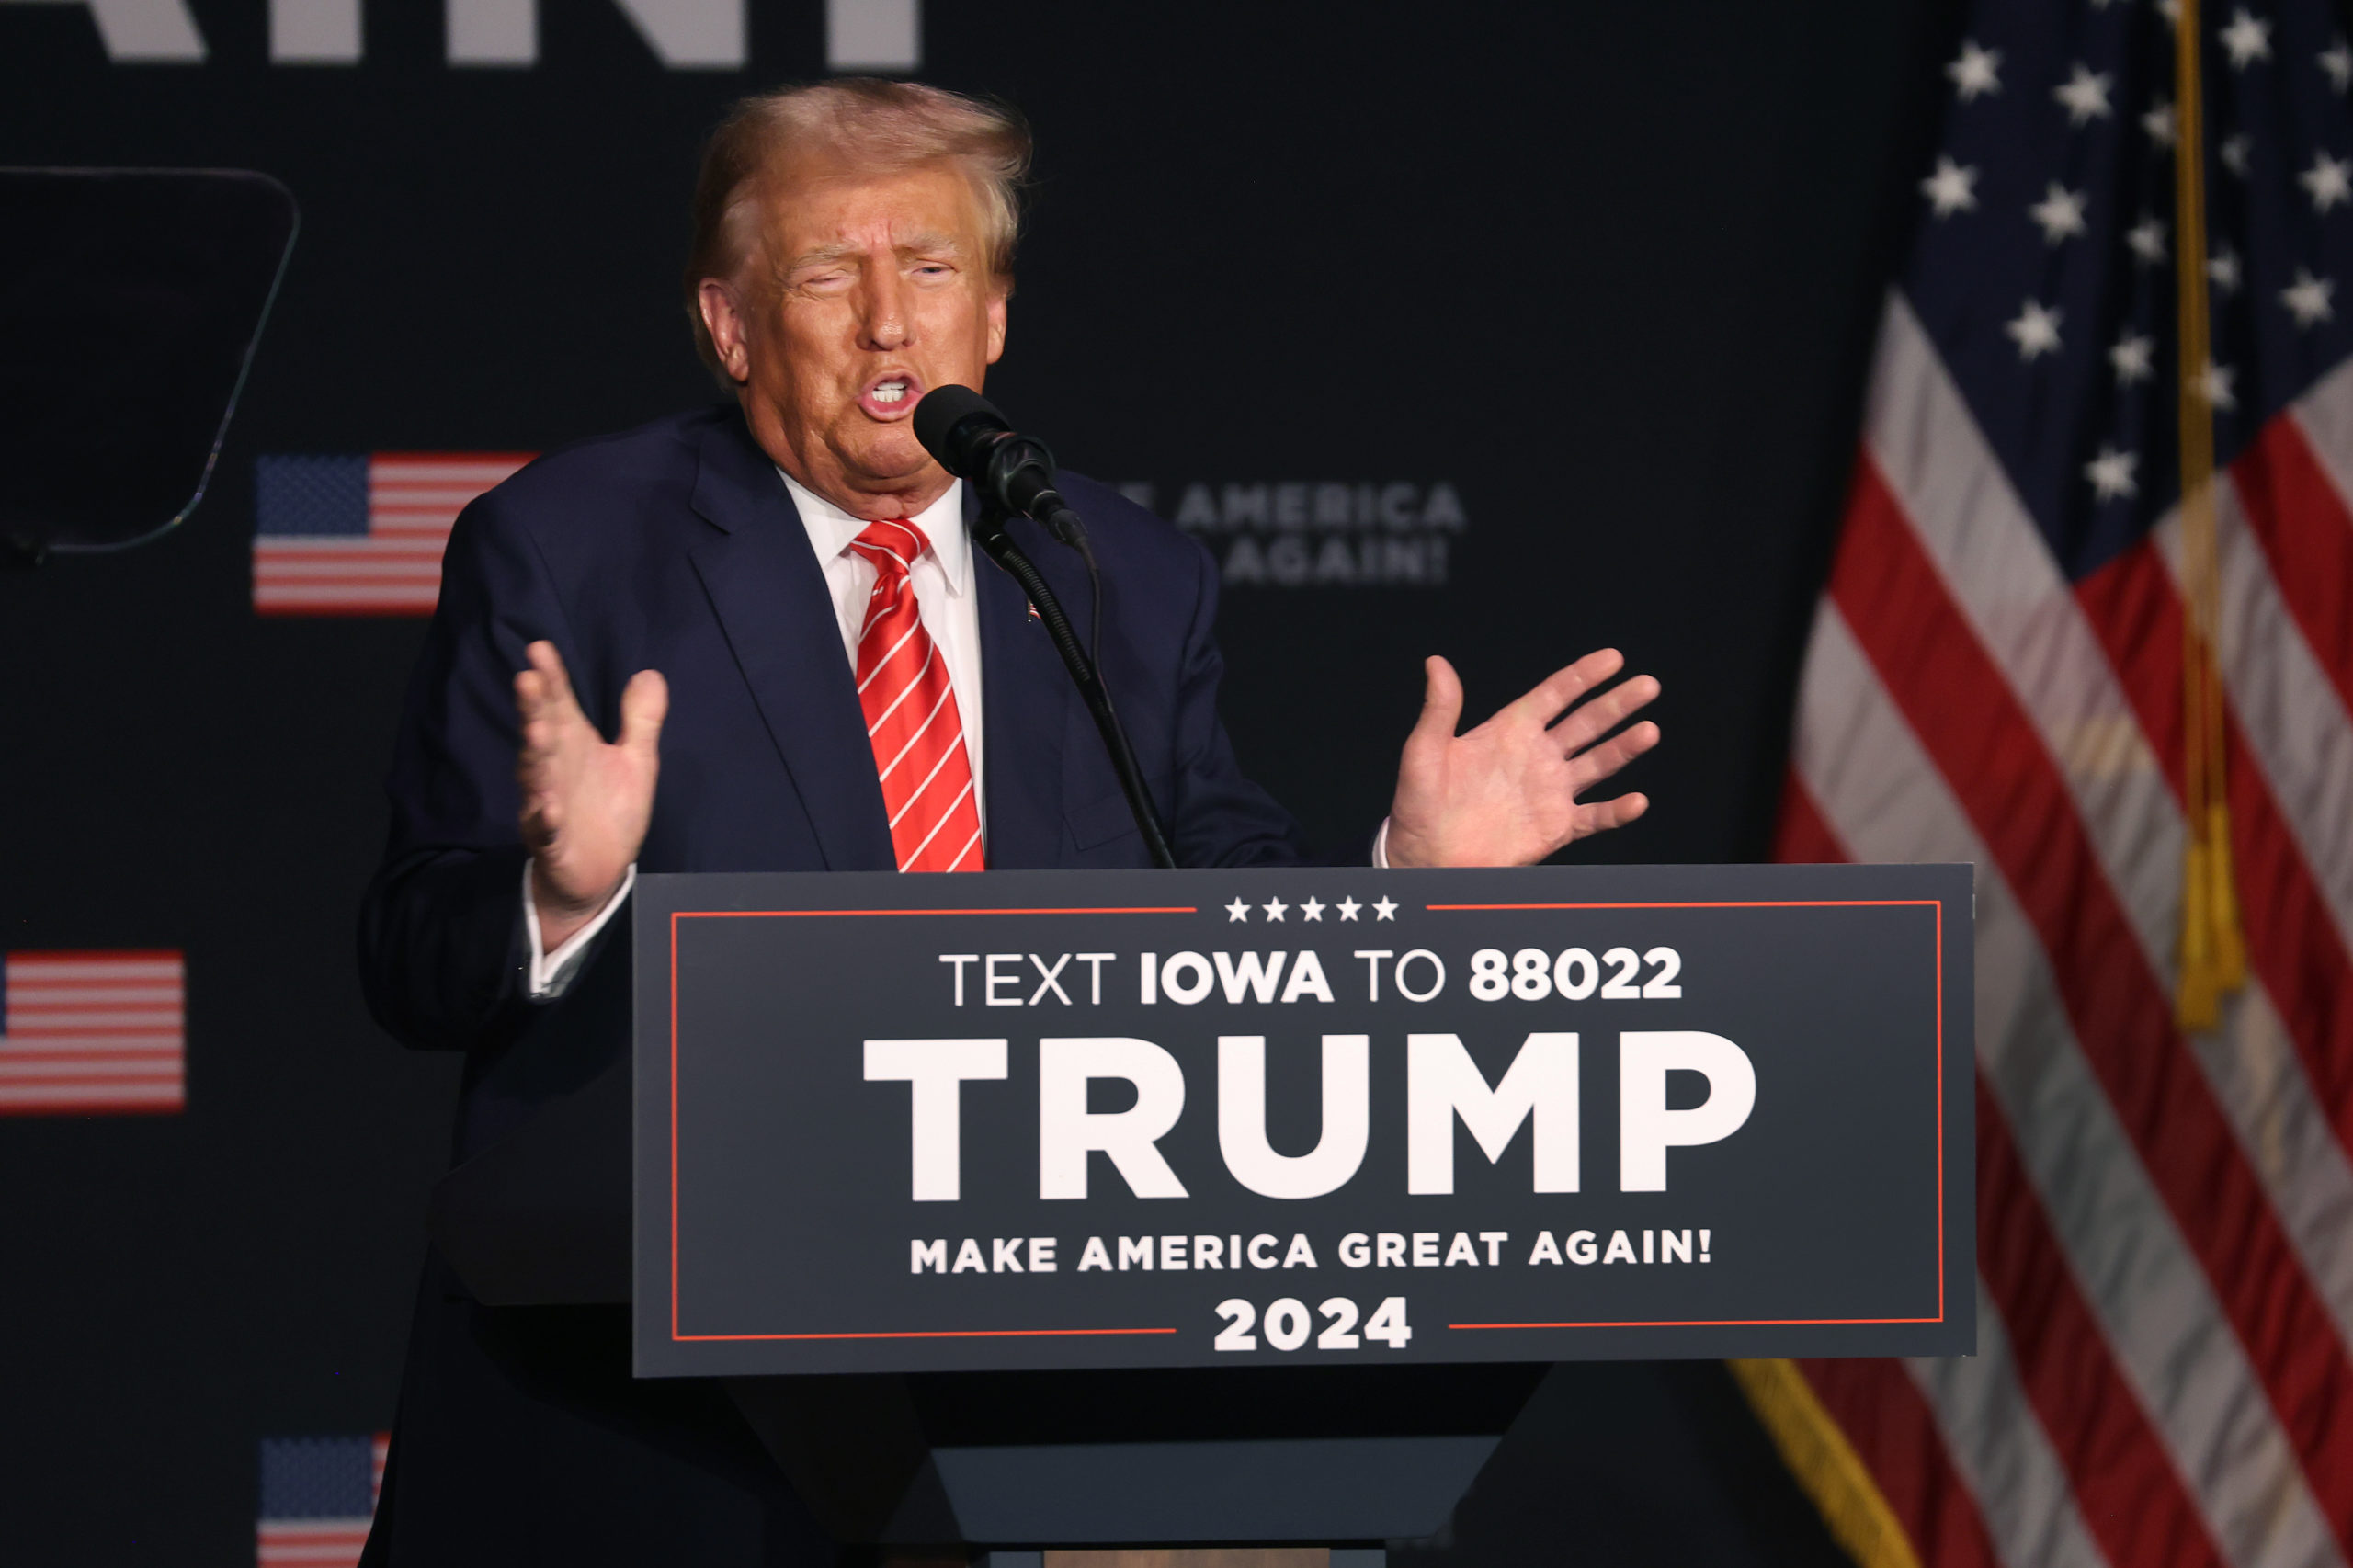 SIOUX CITY, IOWA - OCTOBER 29: Republican presidential candidate former U.S. President Donald Trump speaks to guests during a campaign event at the Orpheum Theater on October 29, 2023 in Sioux City, Iowa. On Saturday, Trump joined other Republican presidential candidates when he addressed Republican Jewish Coalition’s annual conference where his one-time vice president, Mike Pence, announced he was suspending his campaign. (Photo by Scott Olson/Getty Images)